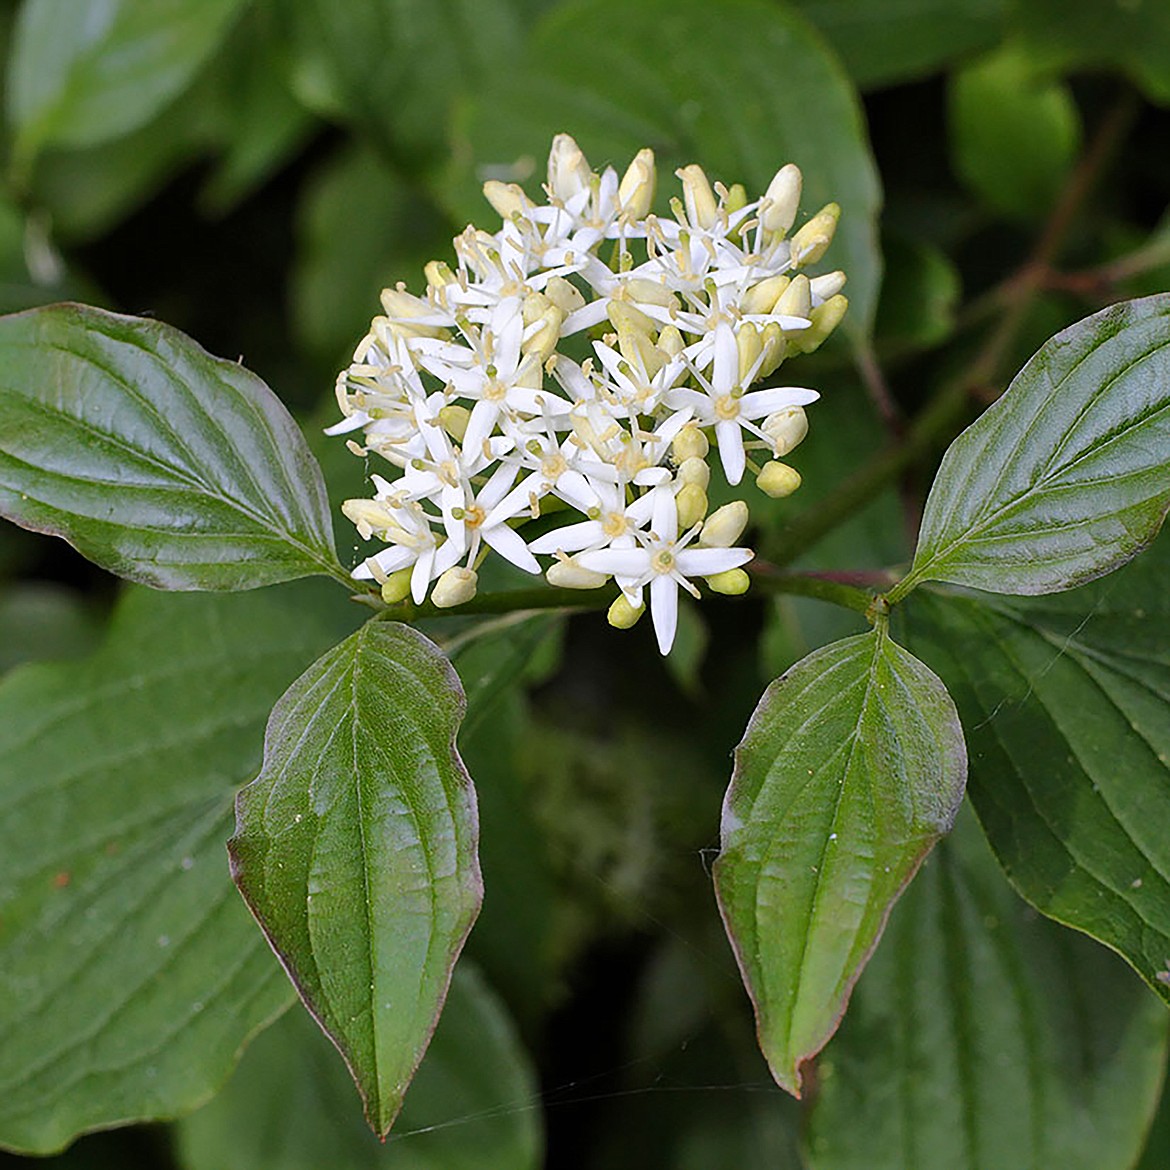 The blooms of the red osier dogwood (cornus sericea) are picture.